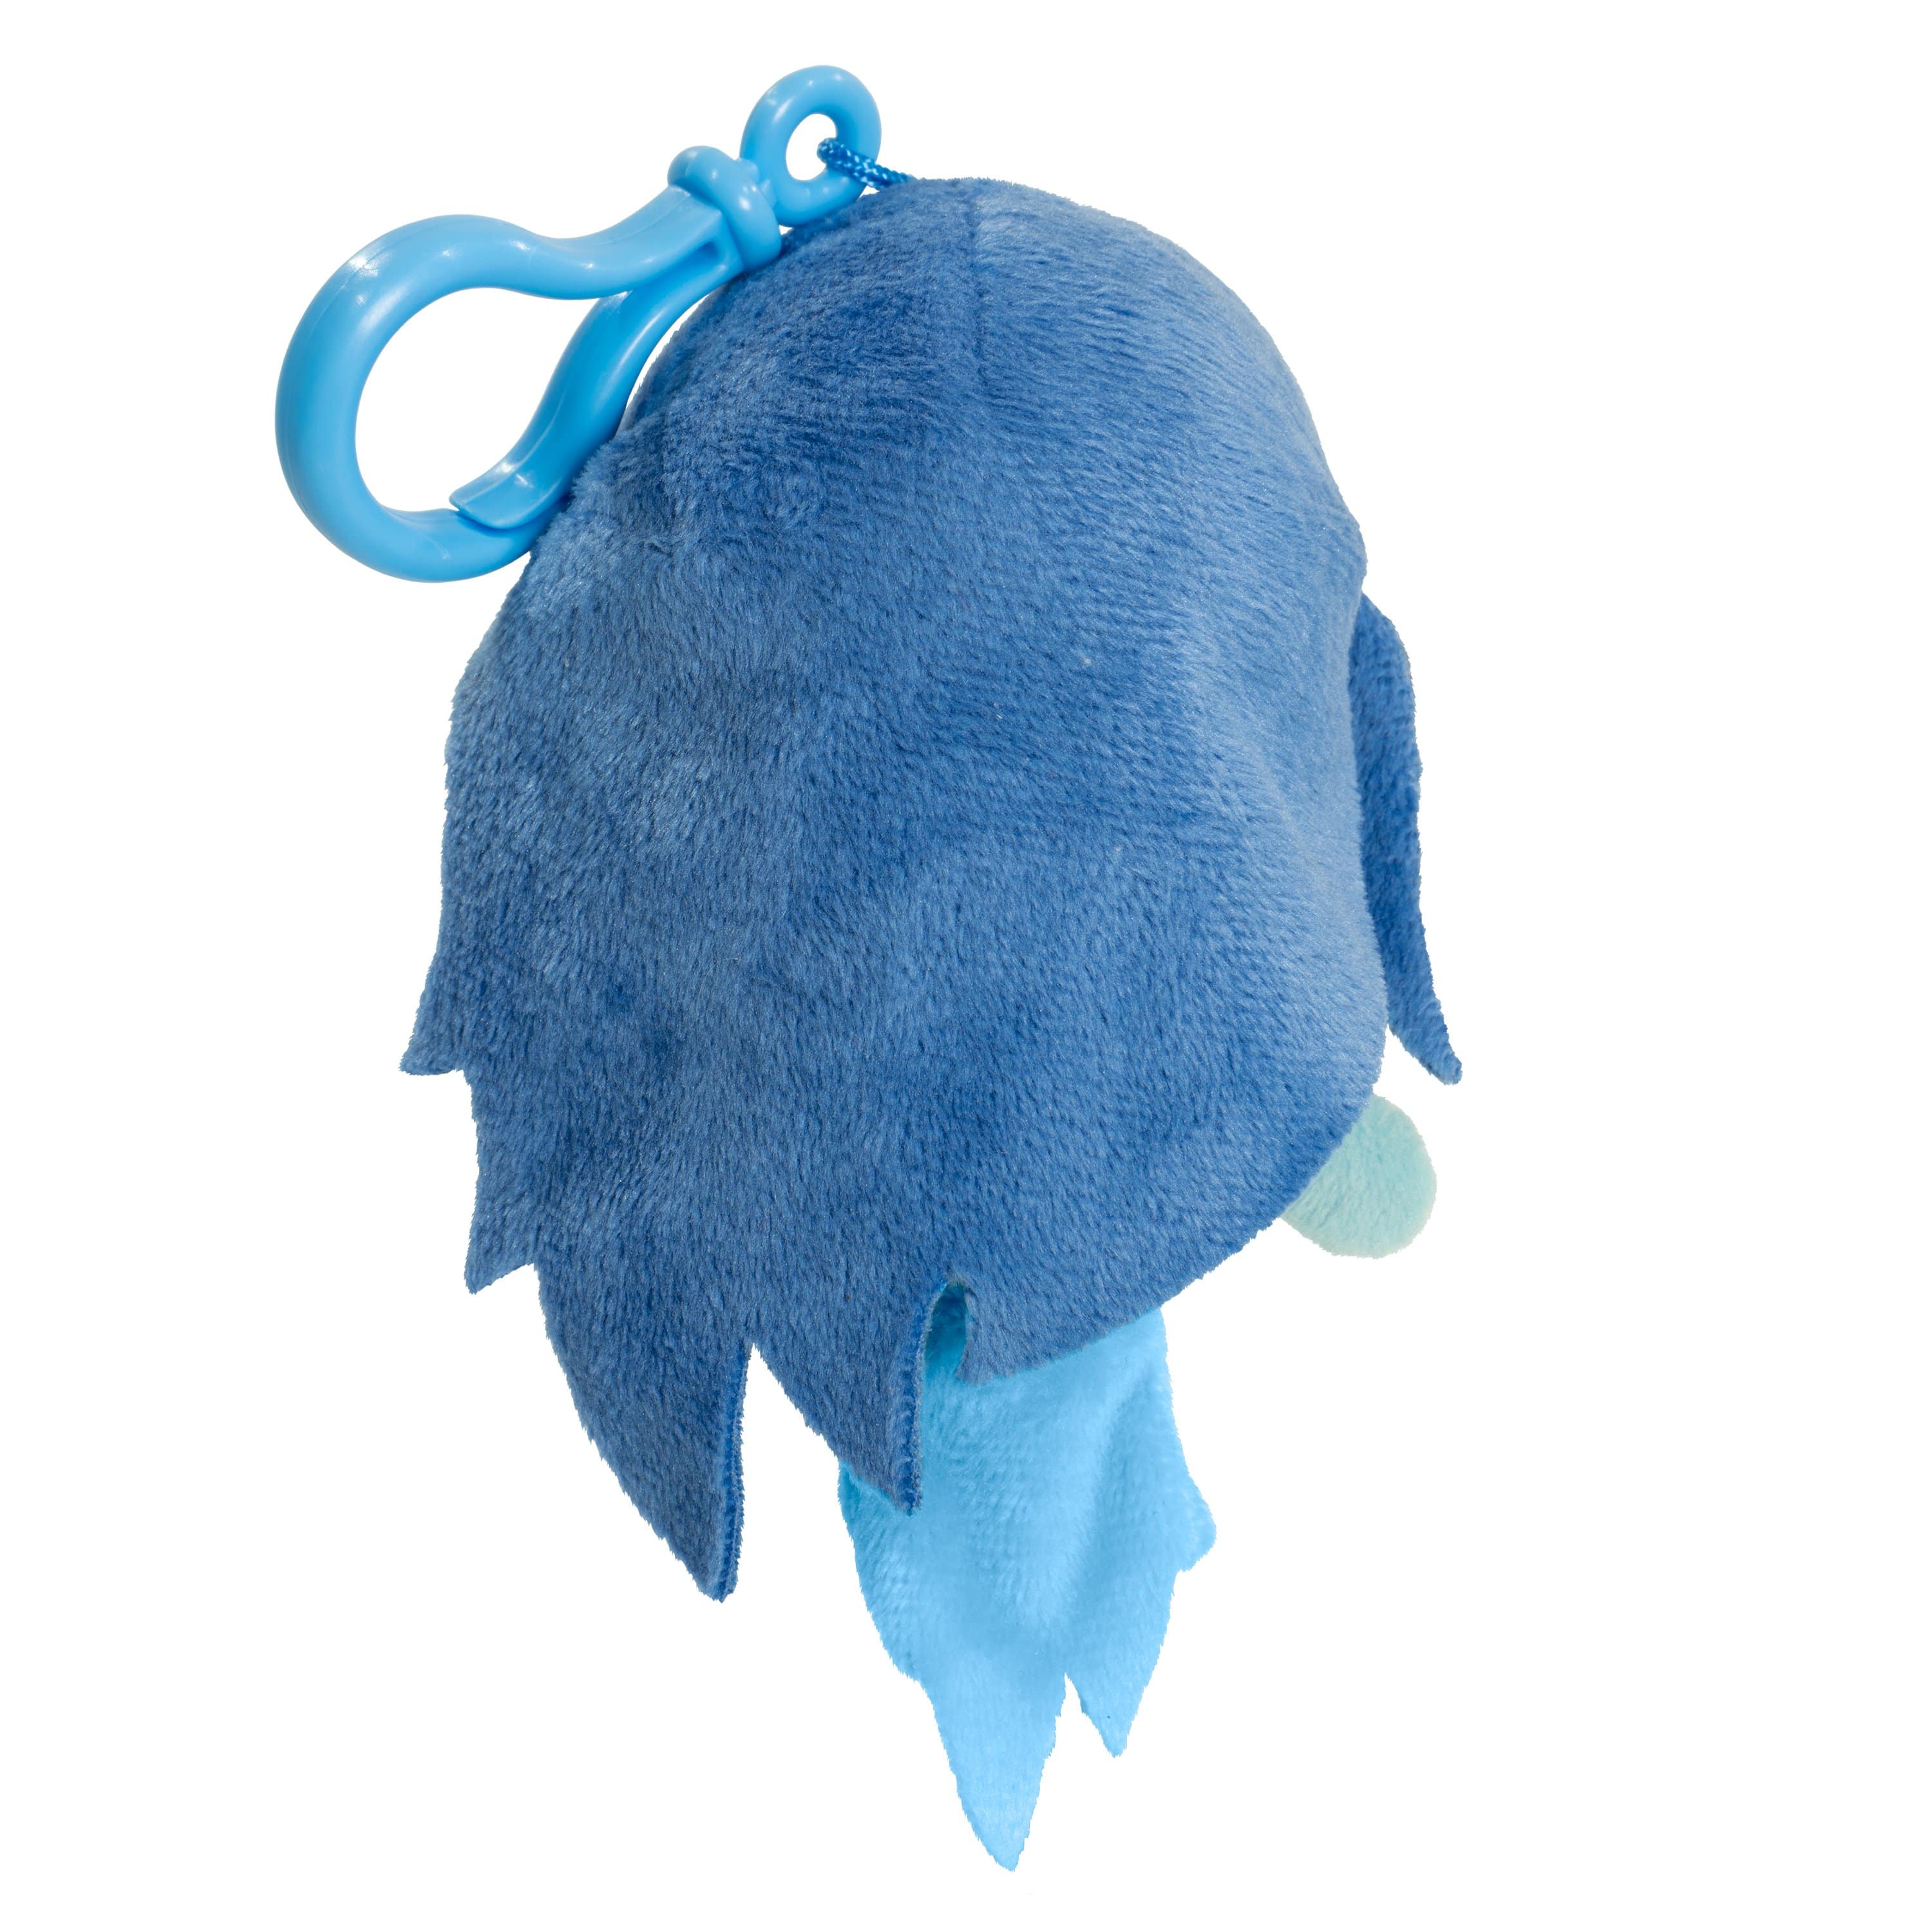 Spooky's Jumpscare Mansion - 5" Spooky Stuffed Hanger Plush Toy Back View